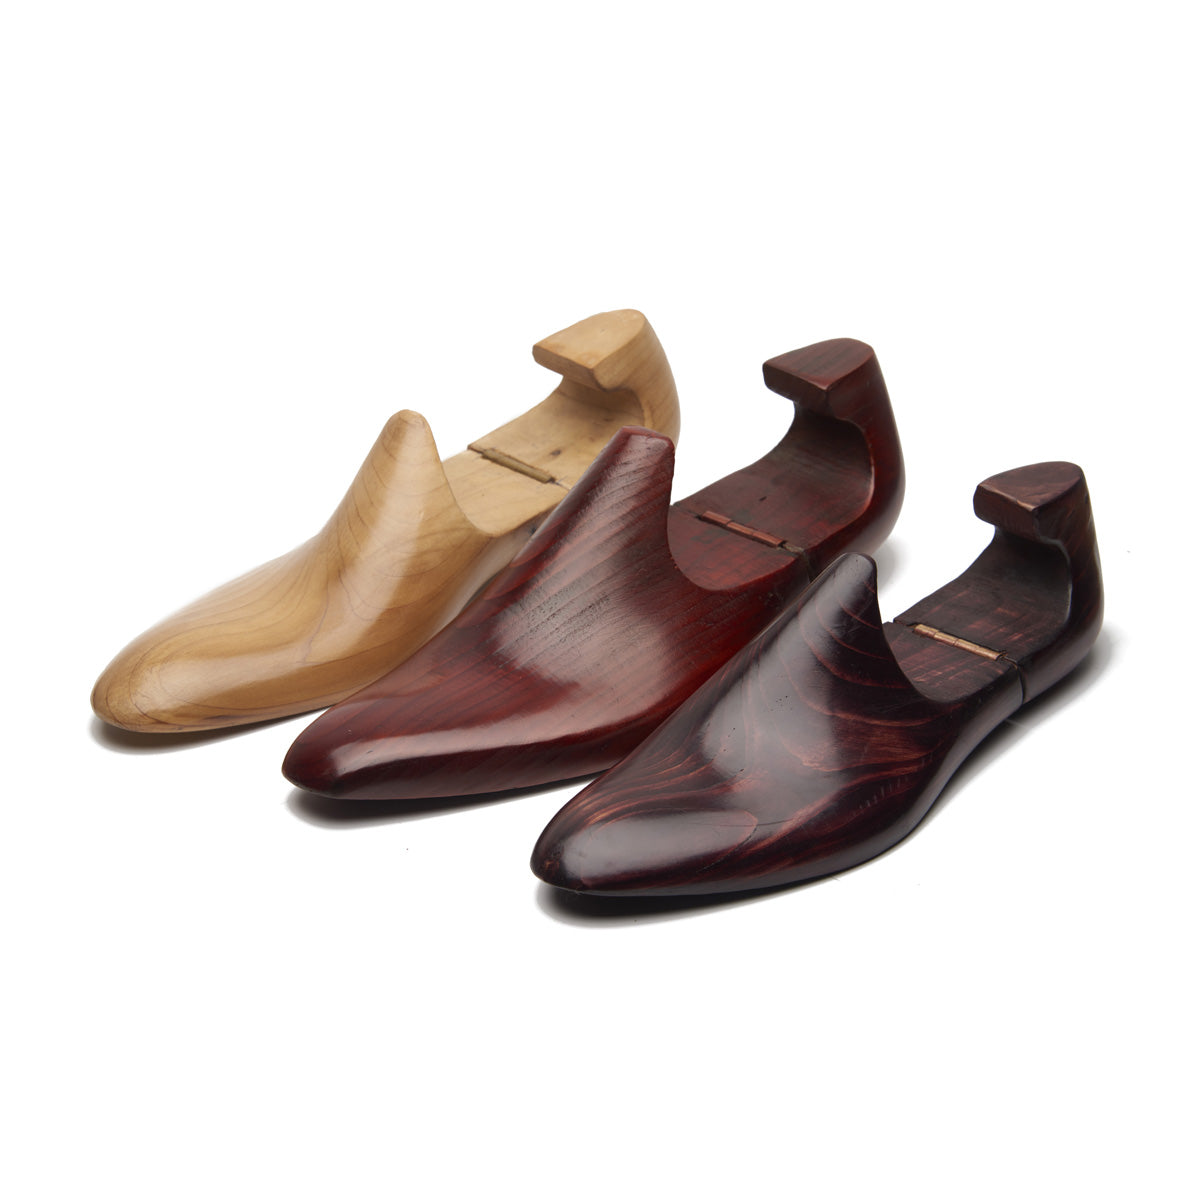 SHOE TREES – BLKBRD SHOEMAKER | HAND WELTED SHOES, HANDCRAFTED IN INDIA